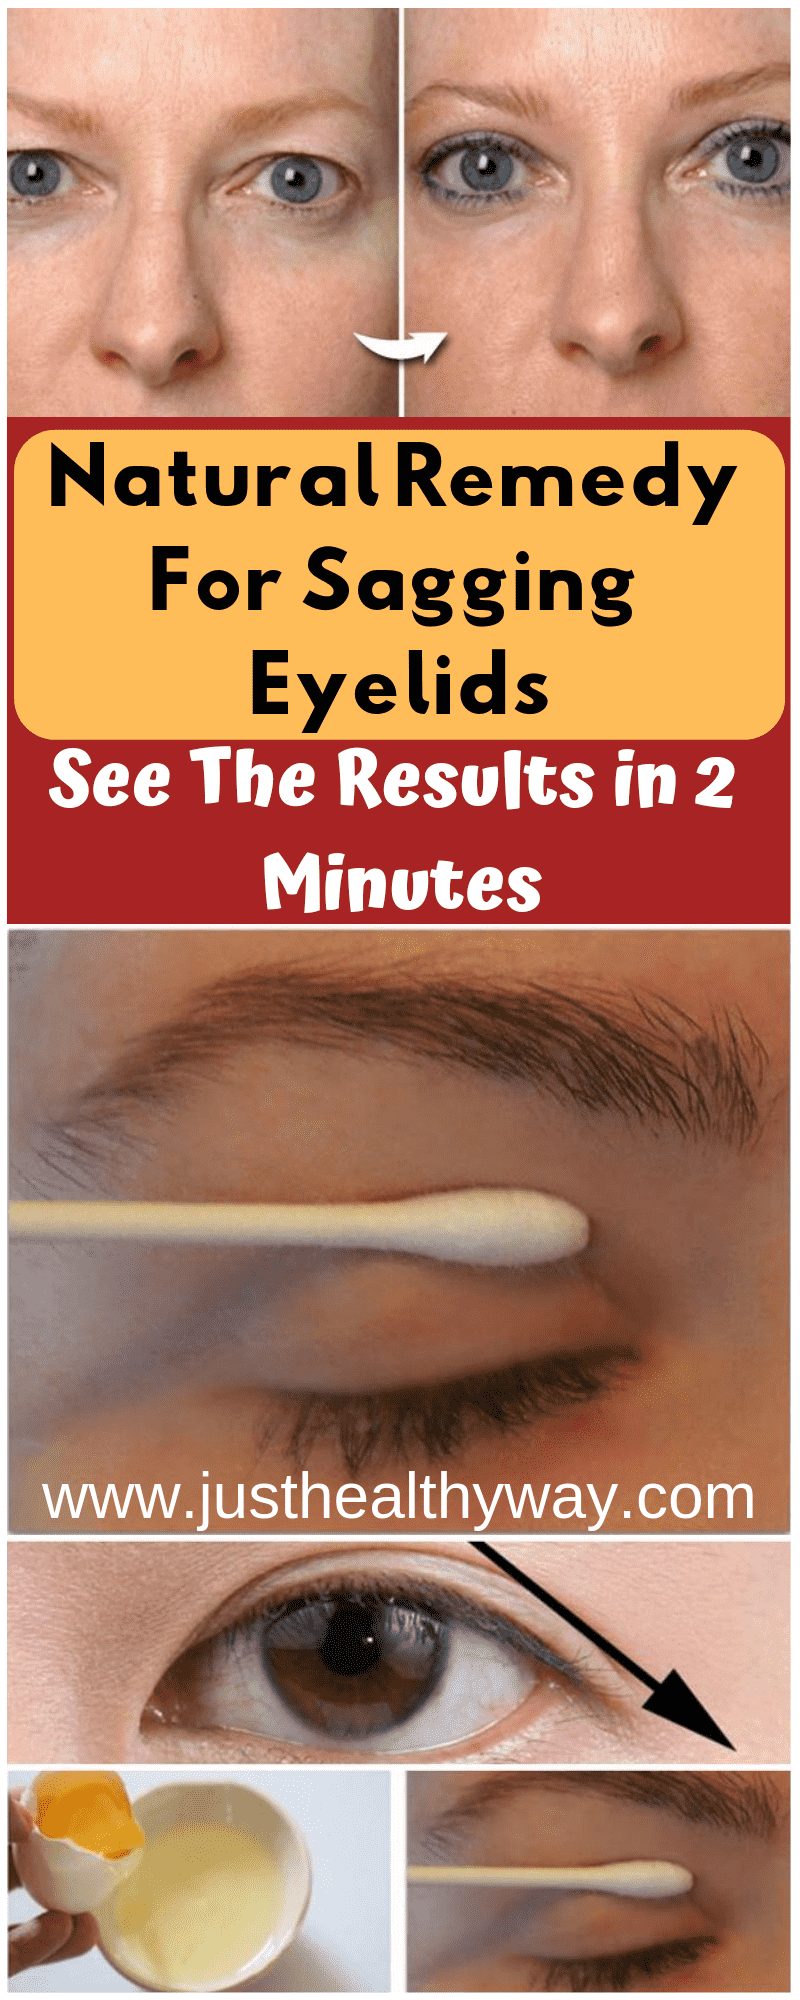 The natural remedy for sagging eyelids and hooded eyes consist of ingredients like an egg. The white part of the egg is very useful to make the skin firm and tighten it quickly.